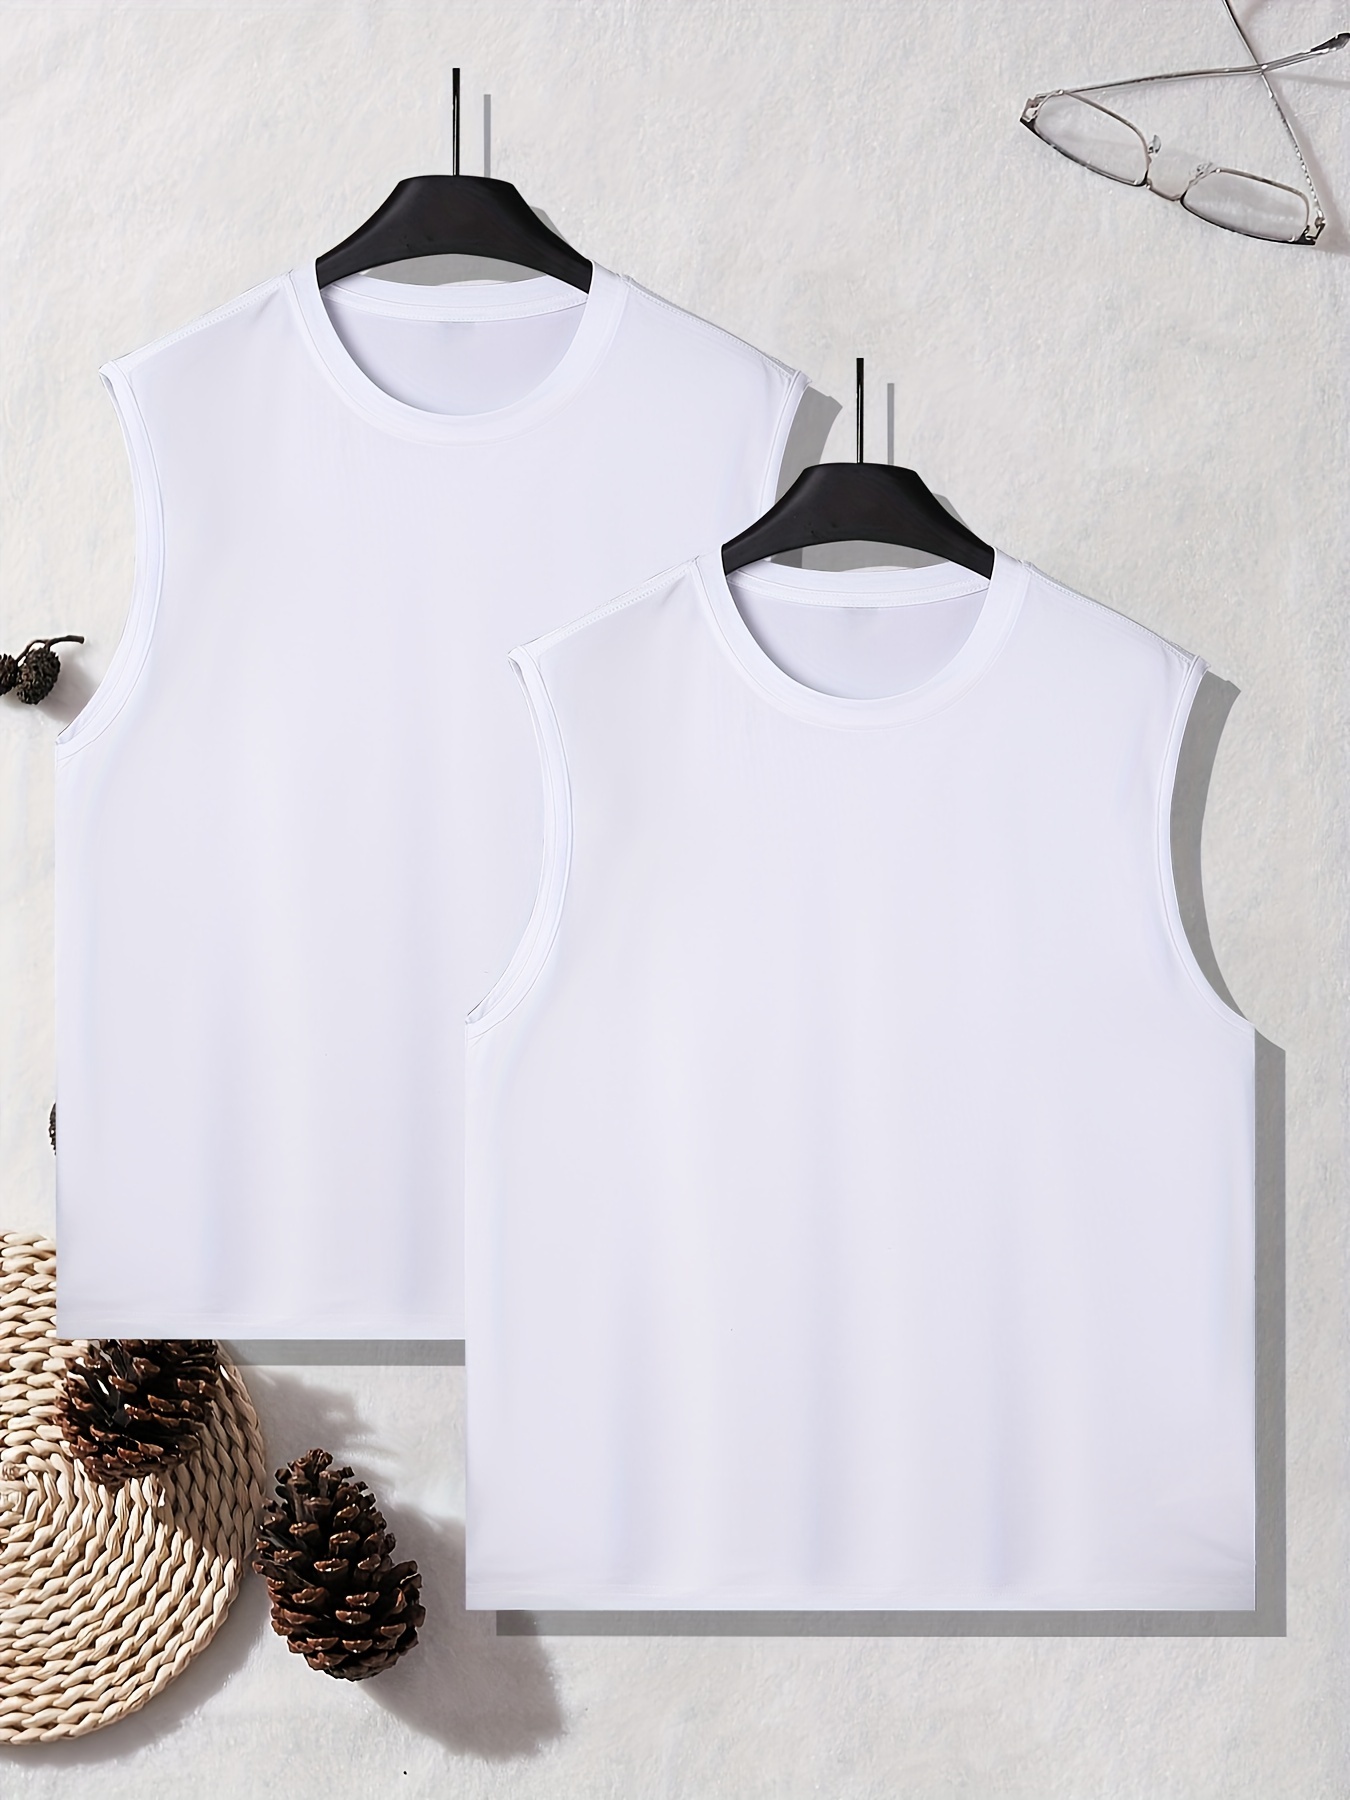  Workout Tank Tops for Women Loose Fit Summer Solid